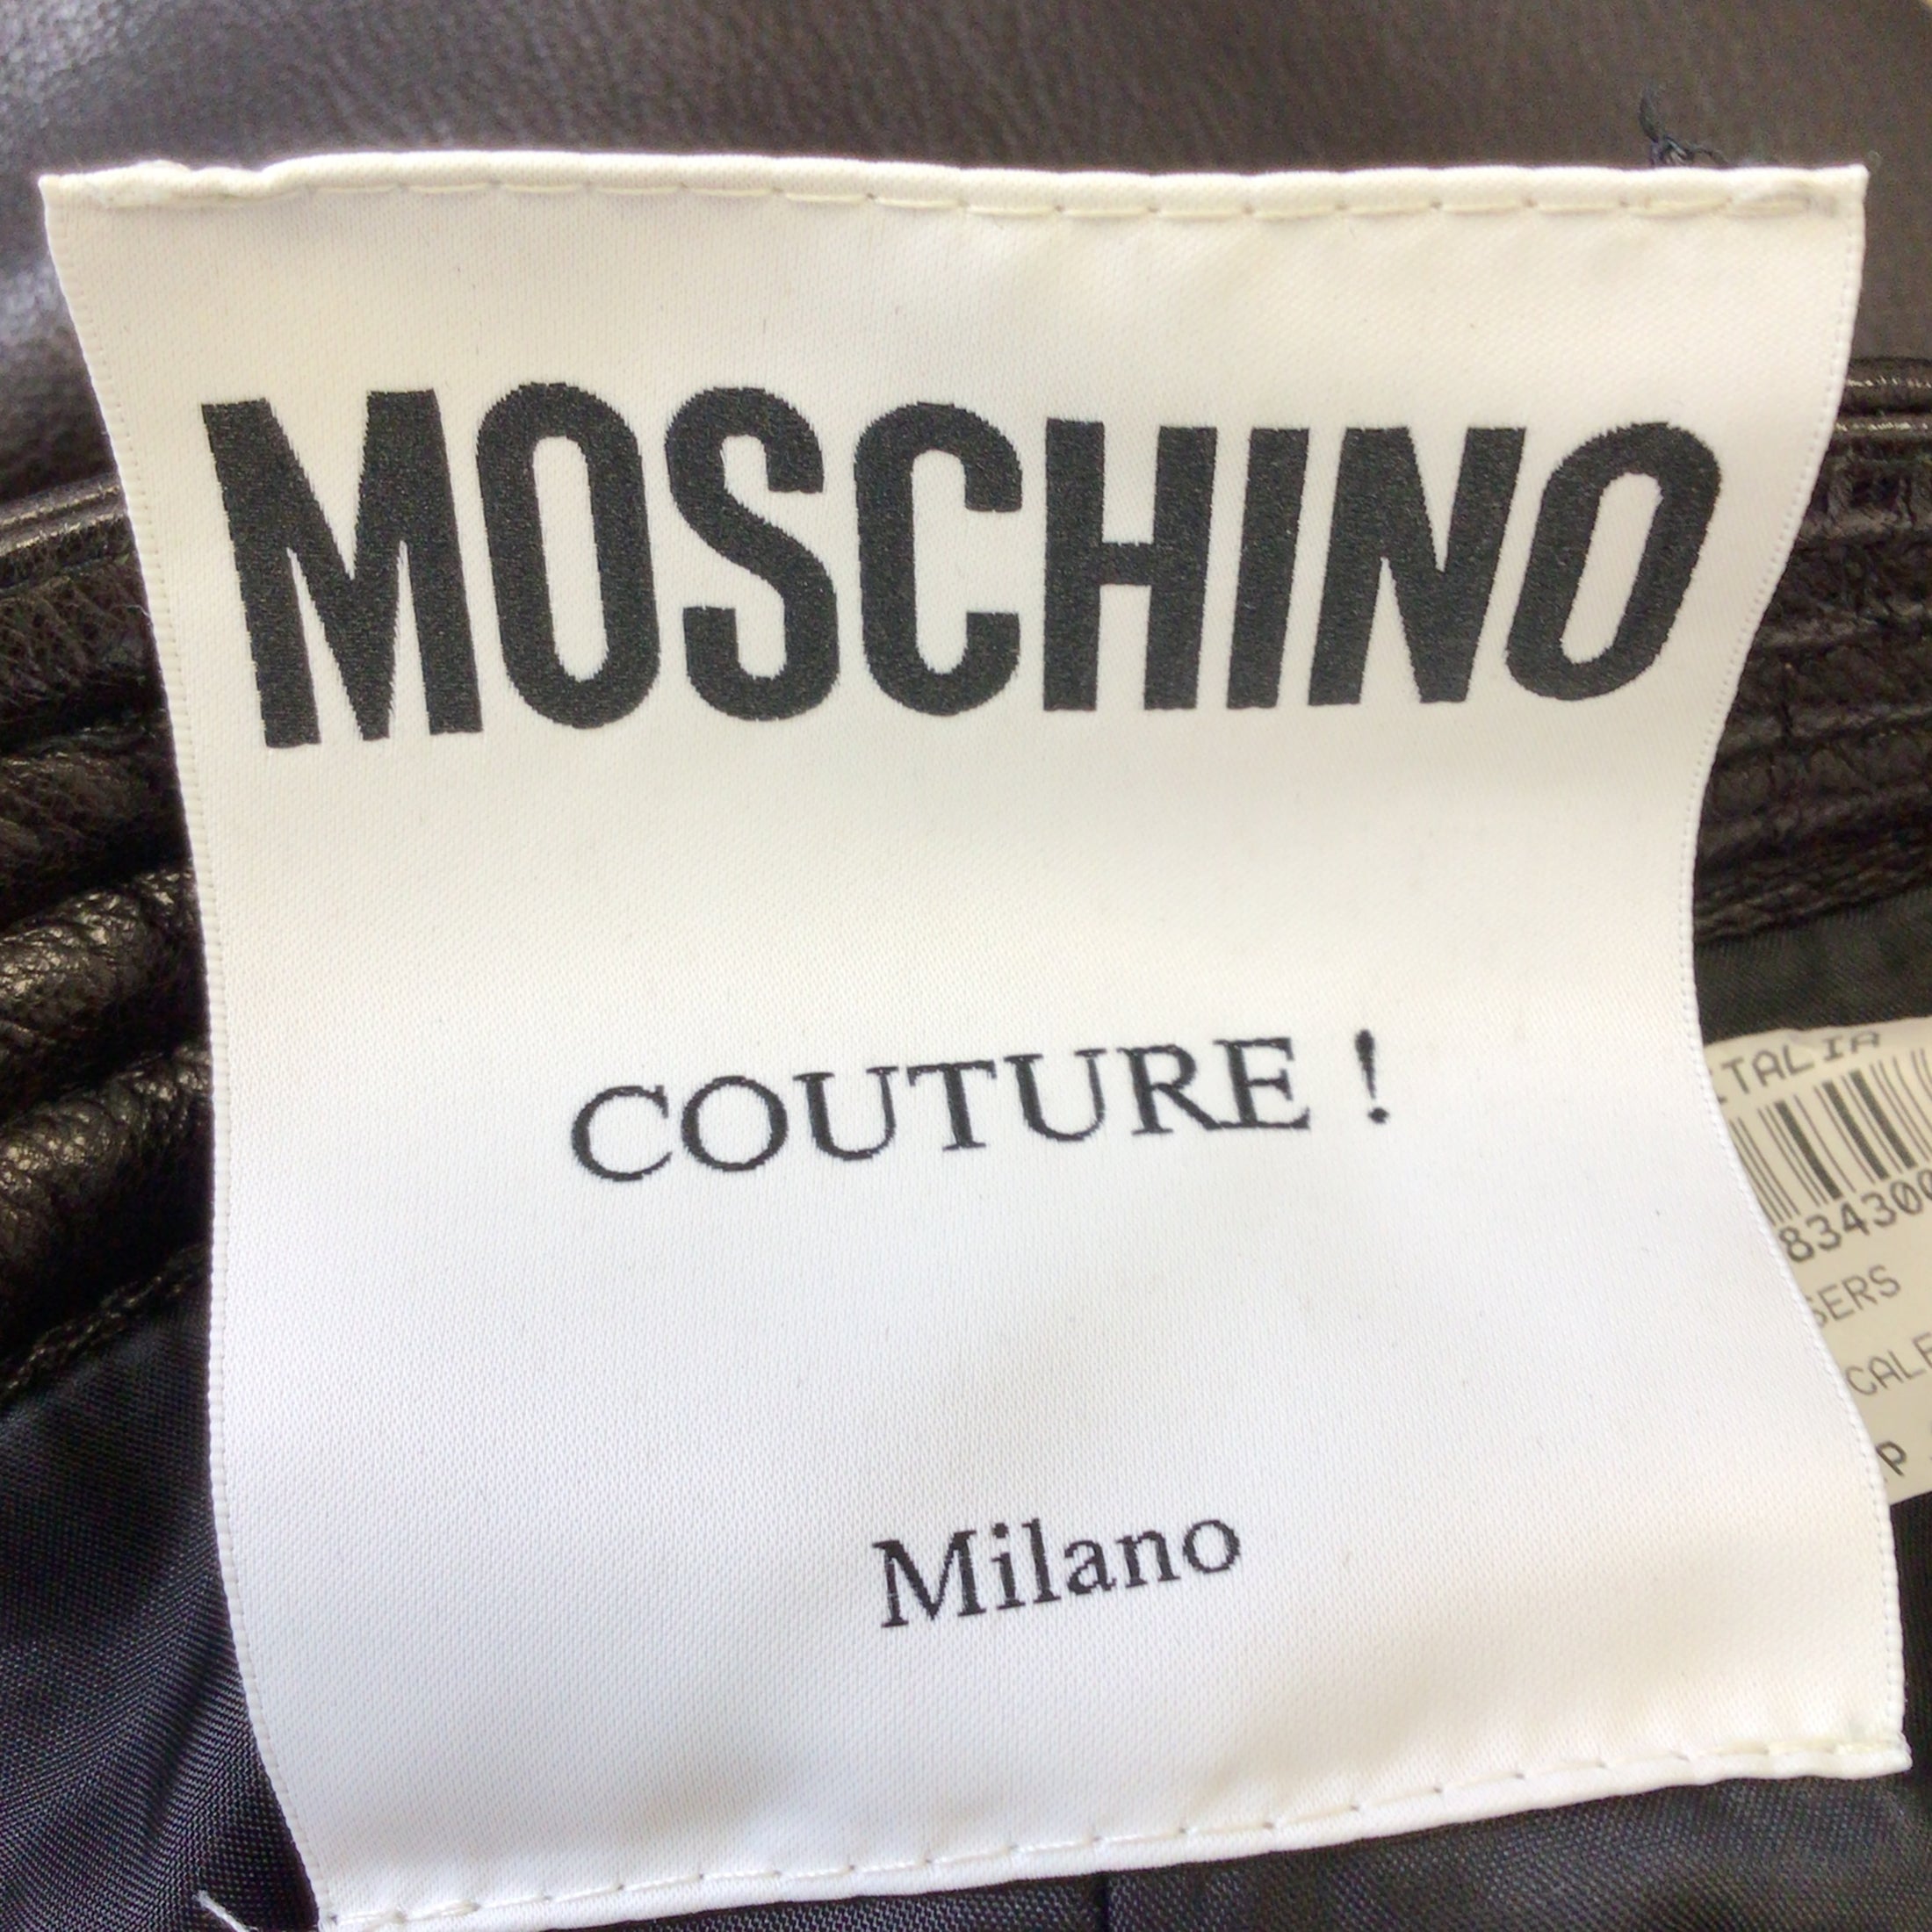 Moschino Couture Black / Silver Zipper Detail Leather Pants